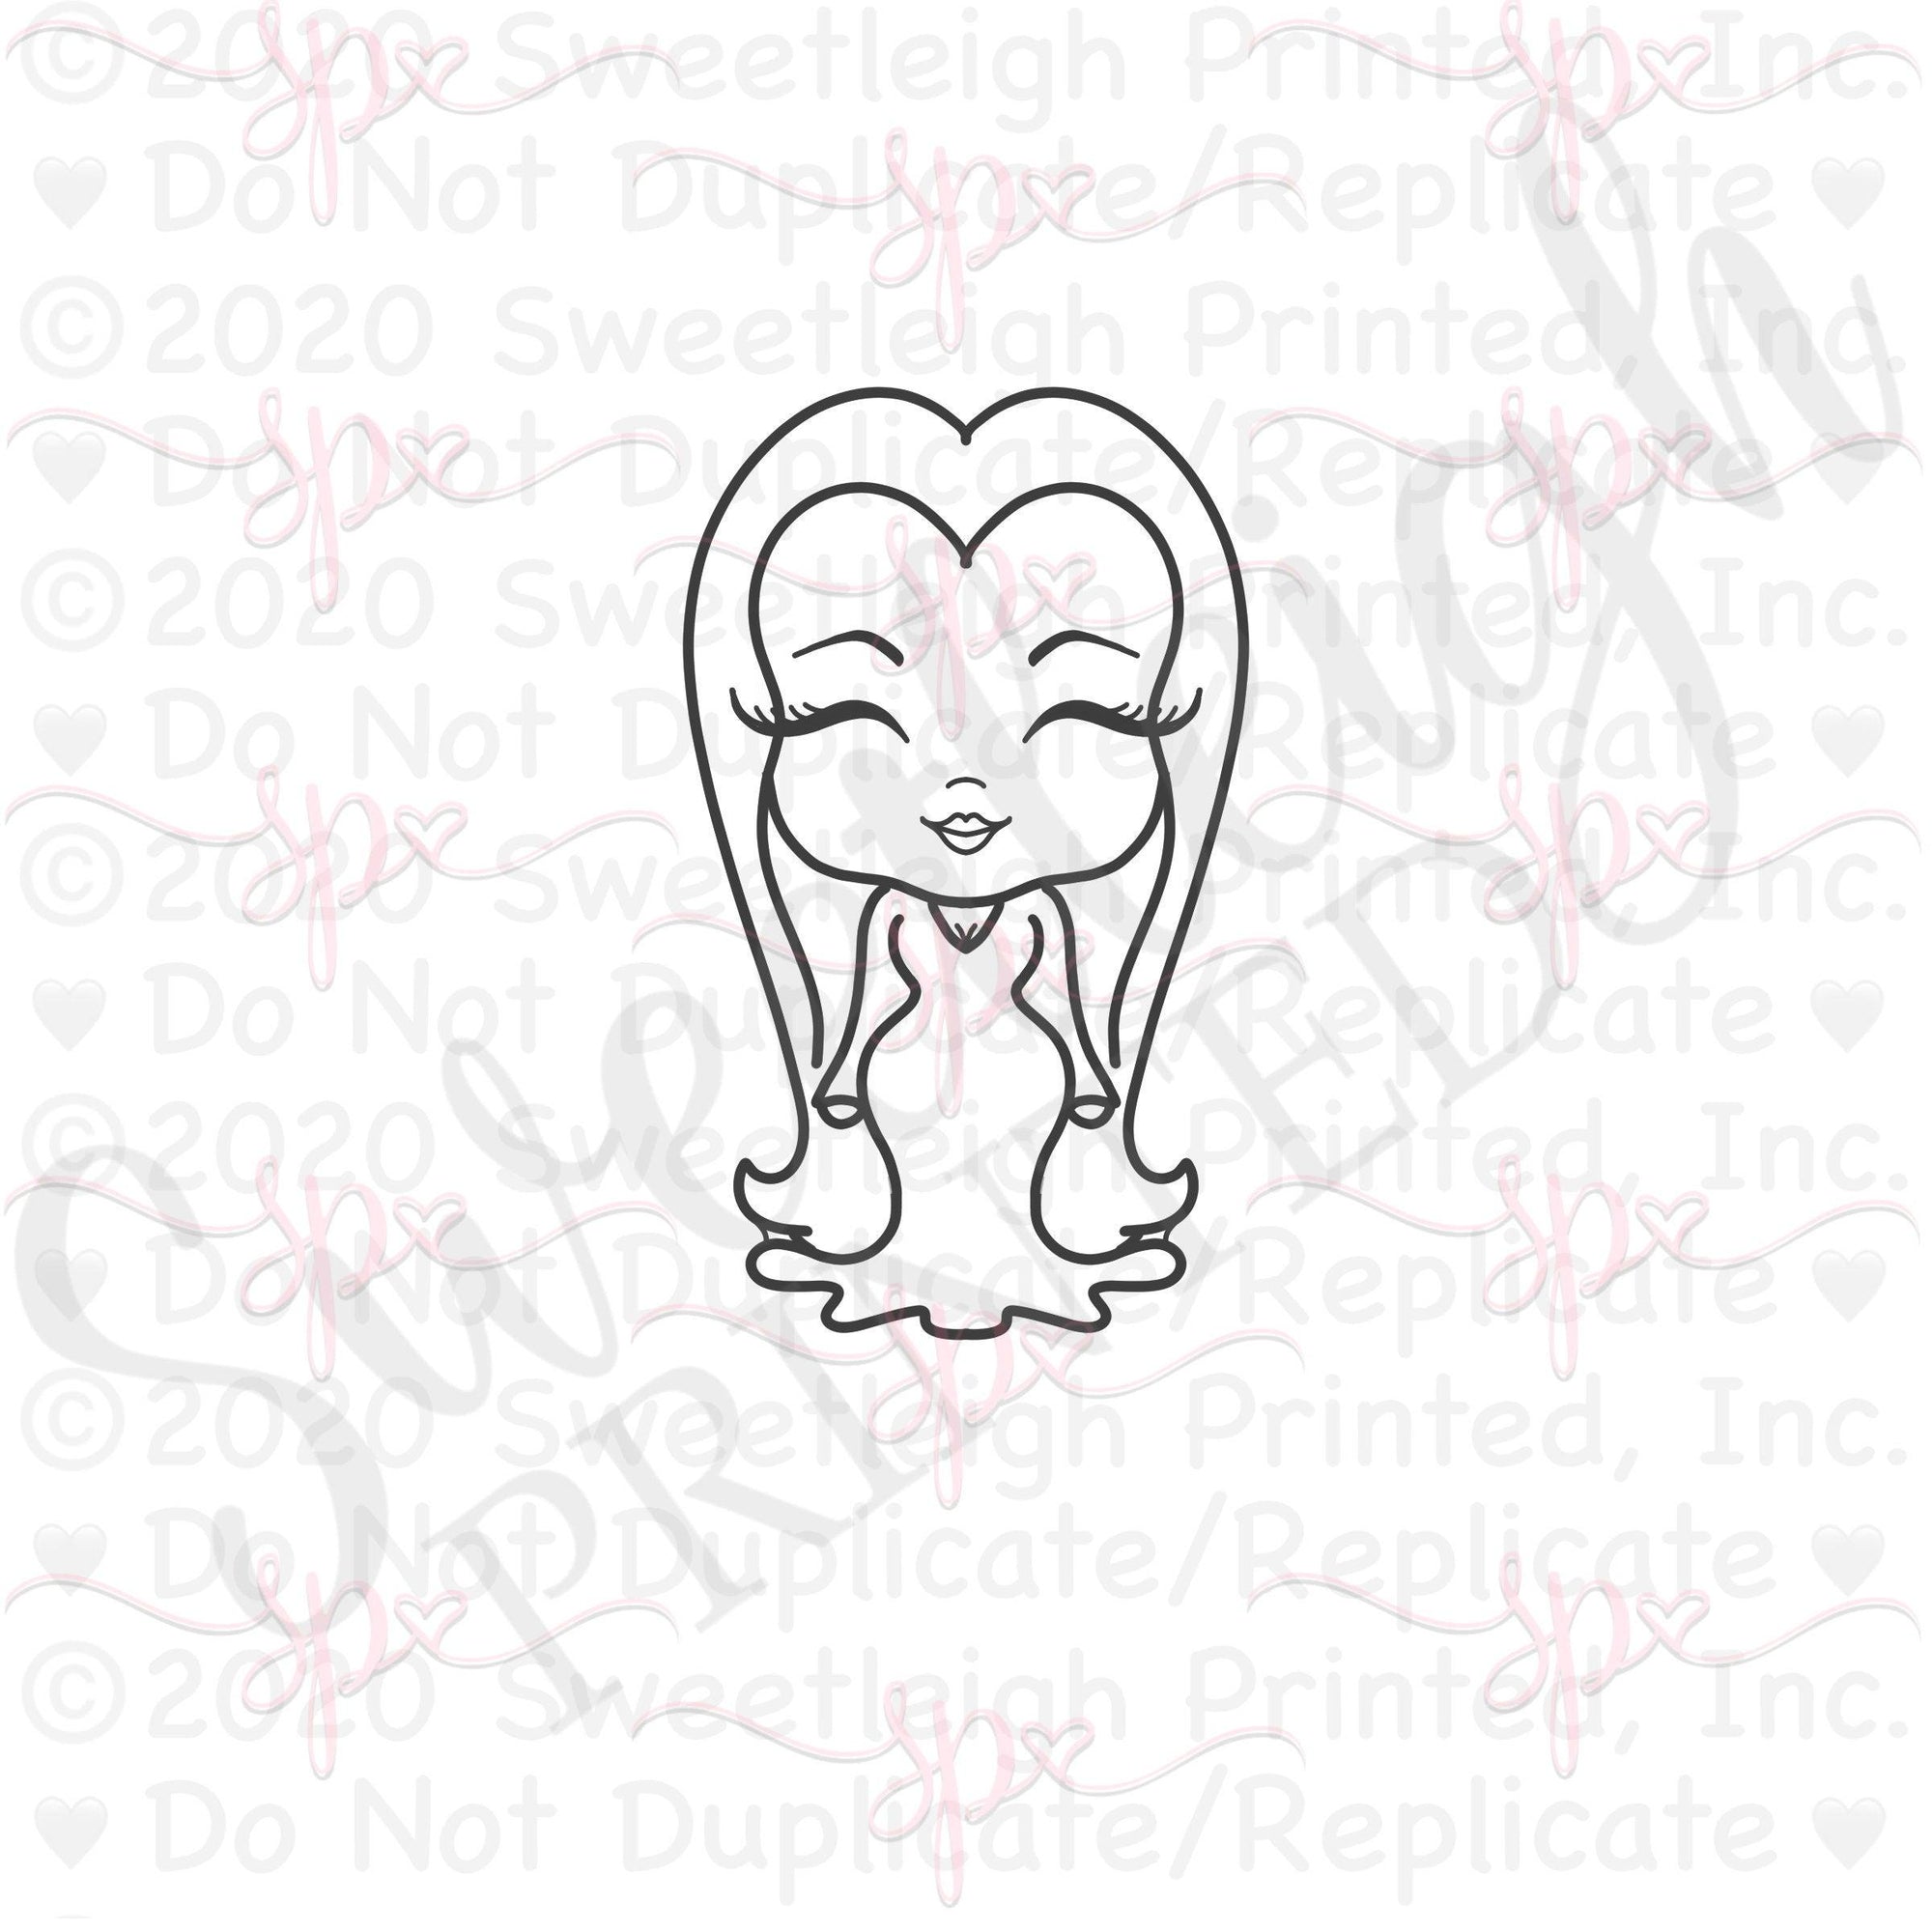 Morticia Addams Cookie Cutter - Sweetleigh 